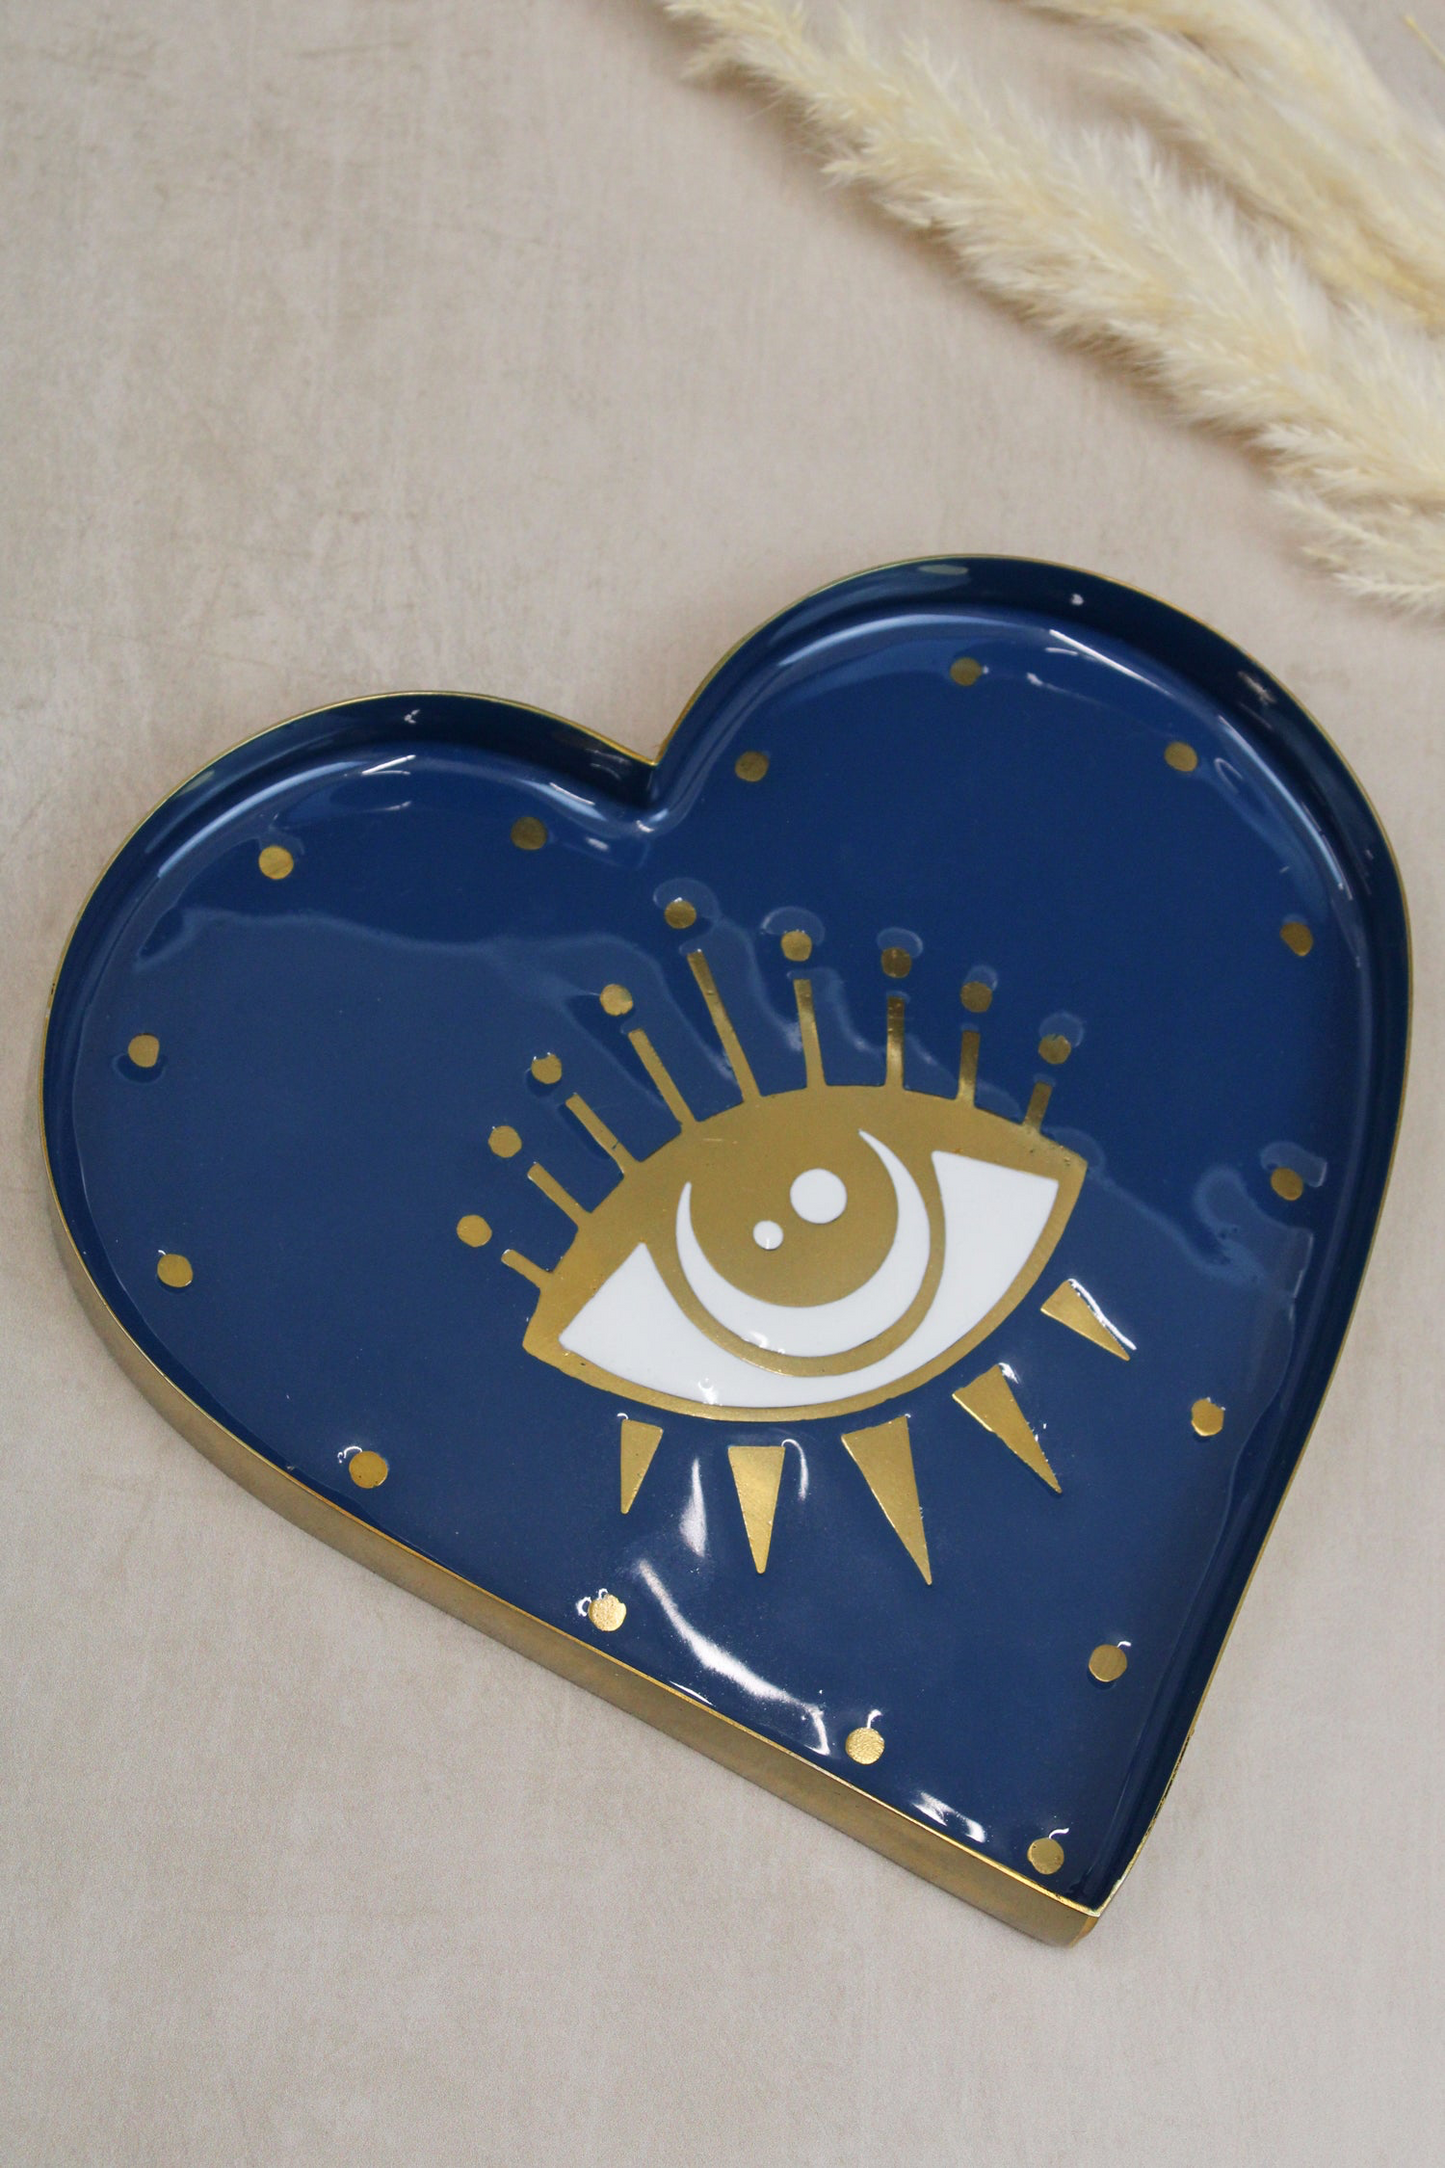 The Every Space brass and hand-enamelled heart-shaped Eye Trinket Dish with a gold eye motif by My Doris